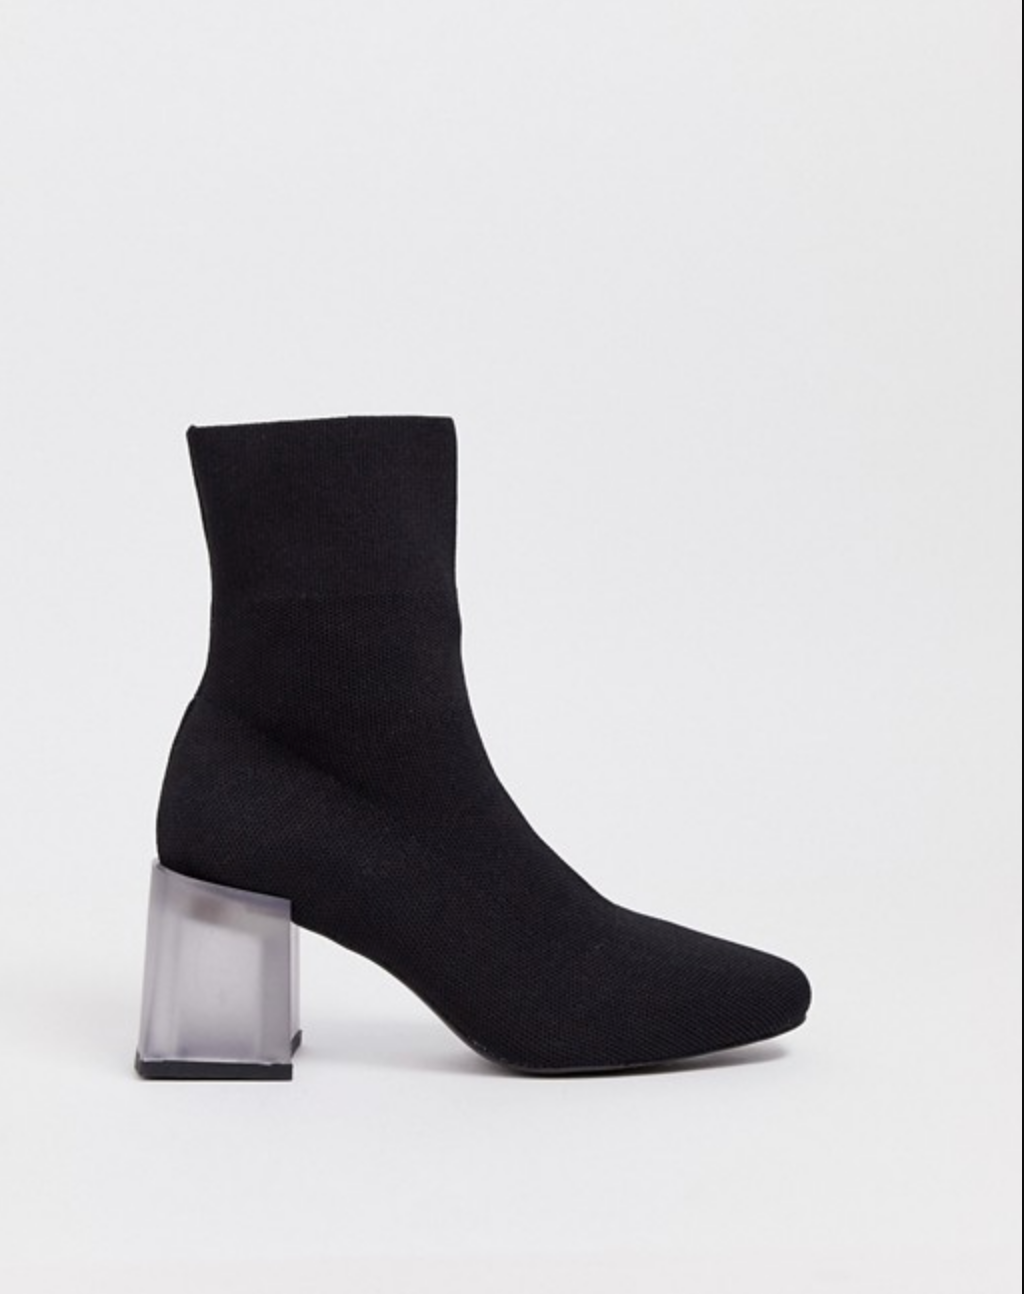 What I Screenshot This Week: The Sculptural Heels That I'm Willing to Step Into Fall For